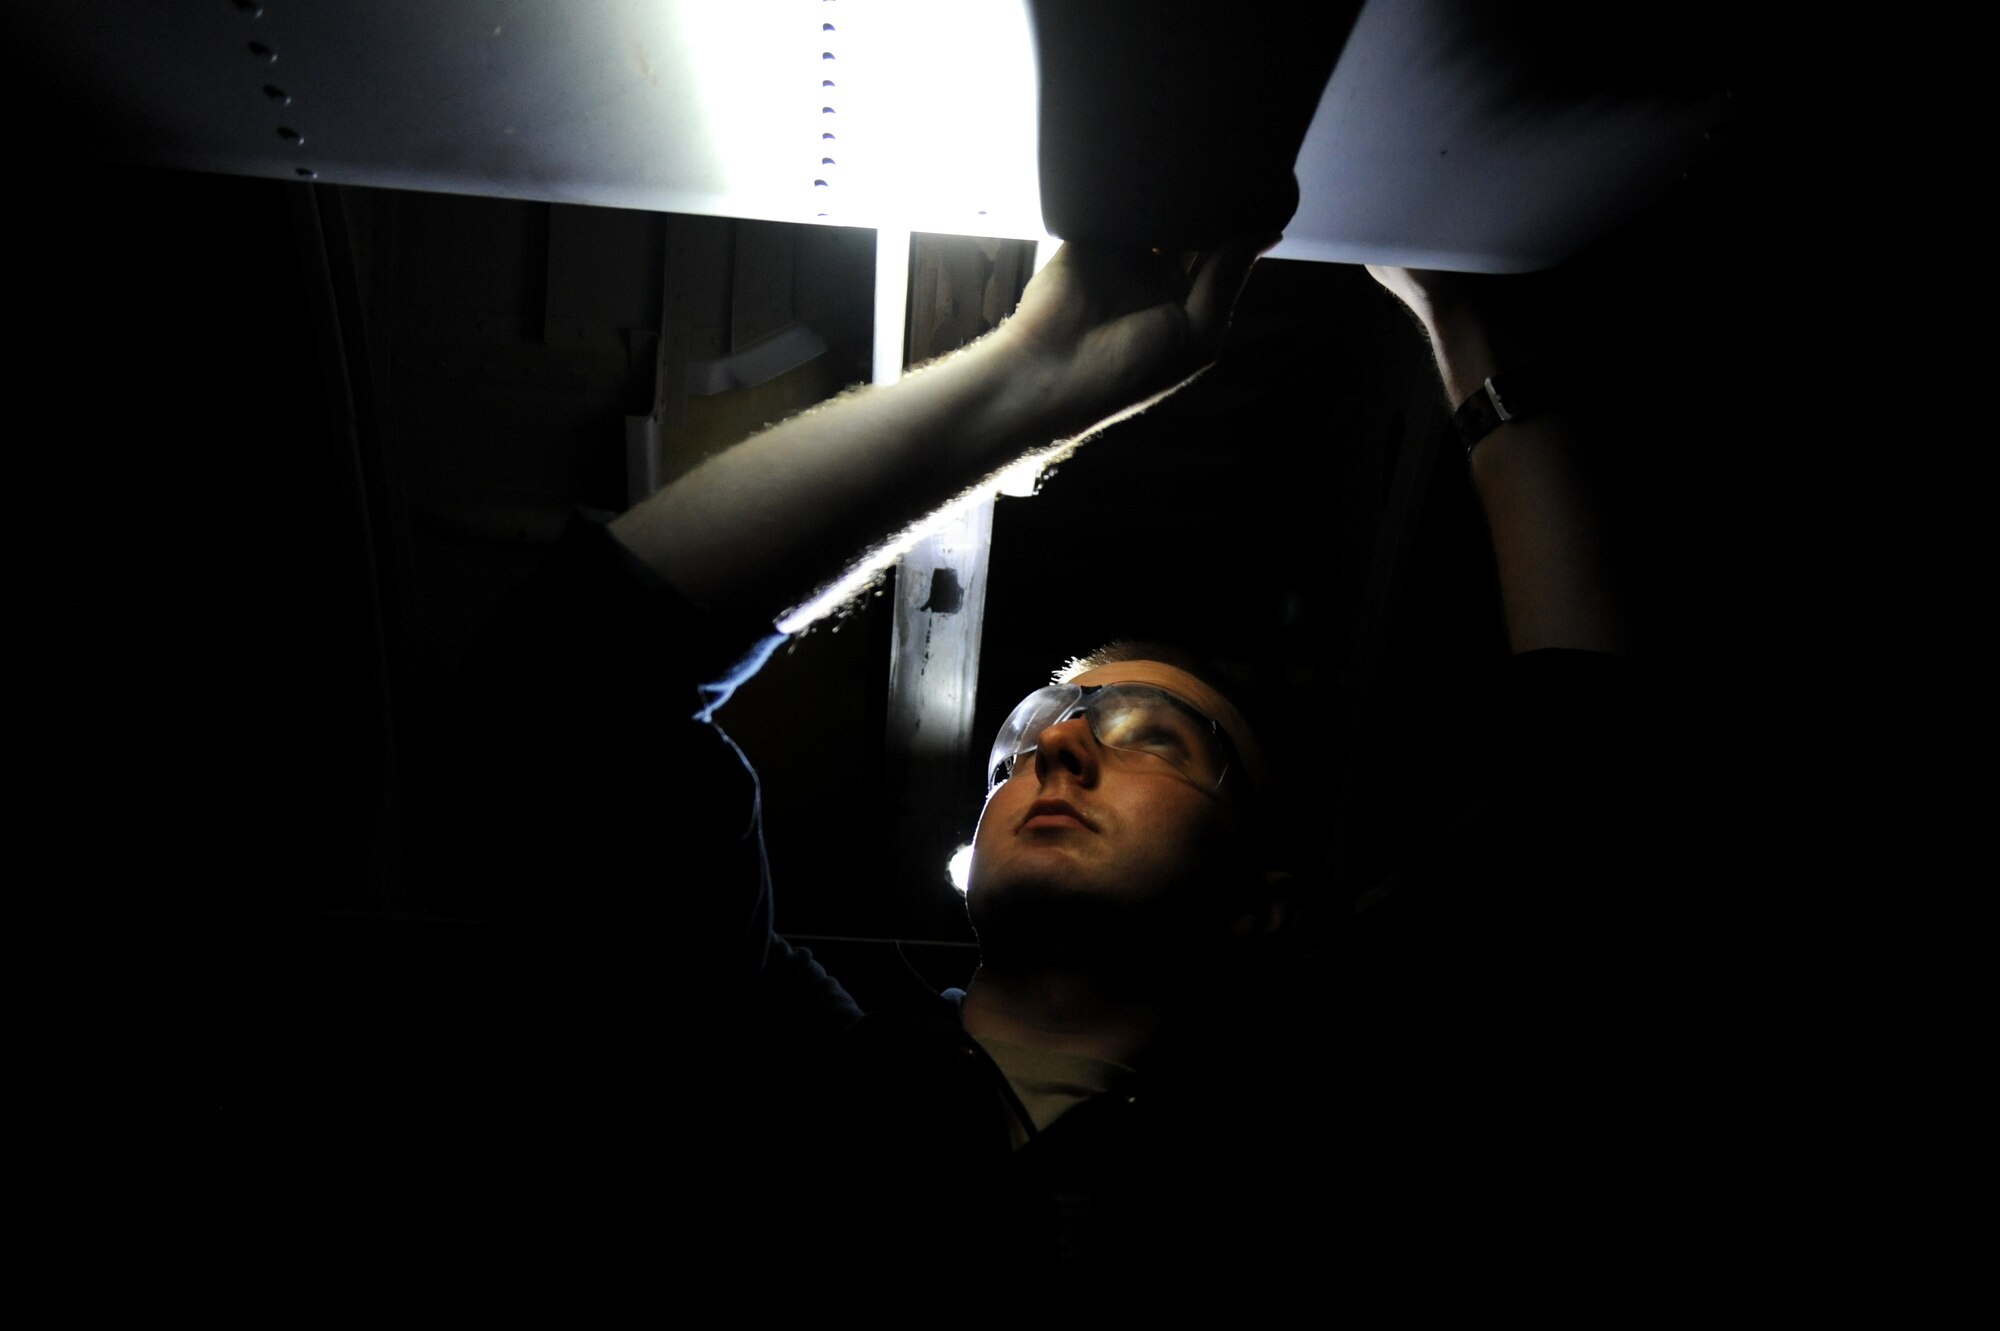 Senior Airmen Joseph Hickman, 19th Maintenance Squadron Reclamation and Repair section journeyman, conducts repairs to a C-130J Aug. 30, 2017, at Little Rock Air Force Base, Ark. Airmen respond quickly to repair major components of an aircraft allowing aircrews to return to the fight. (U.S. Air Force photo by Airman 1st Class Grace Nichols)